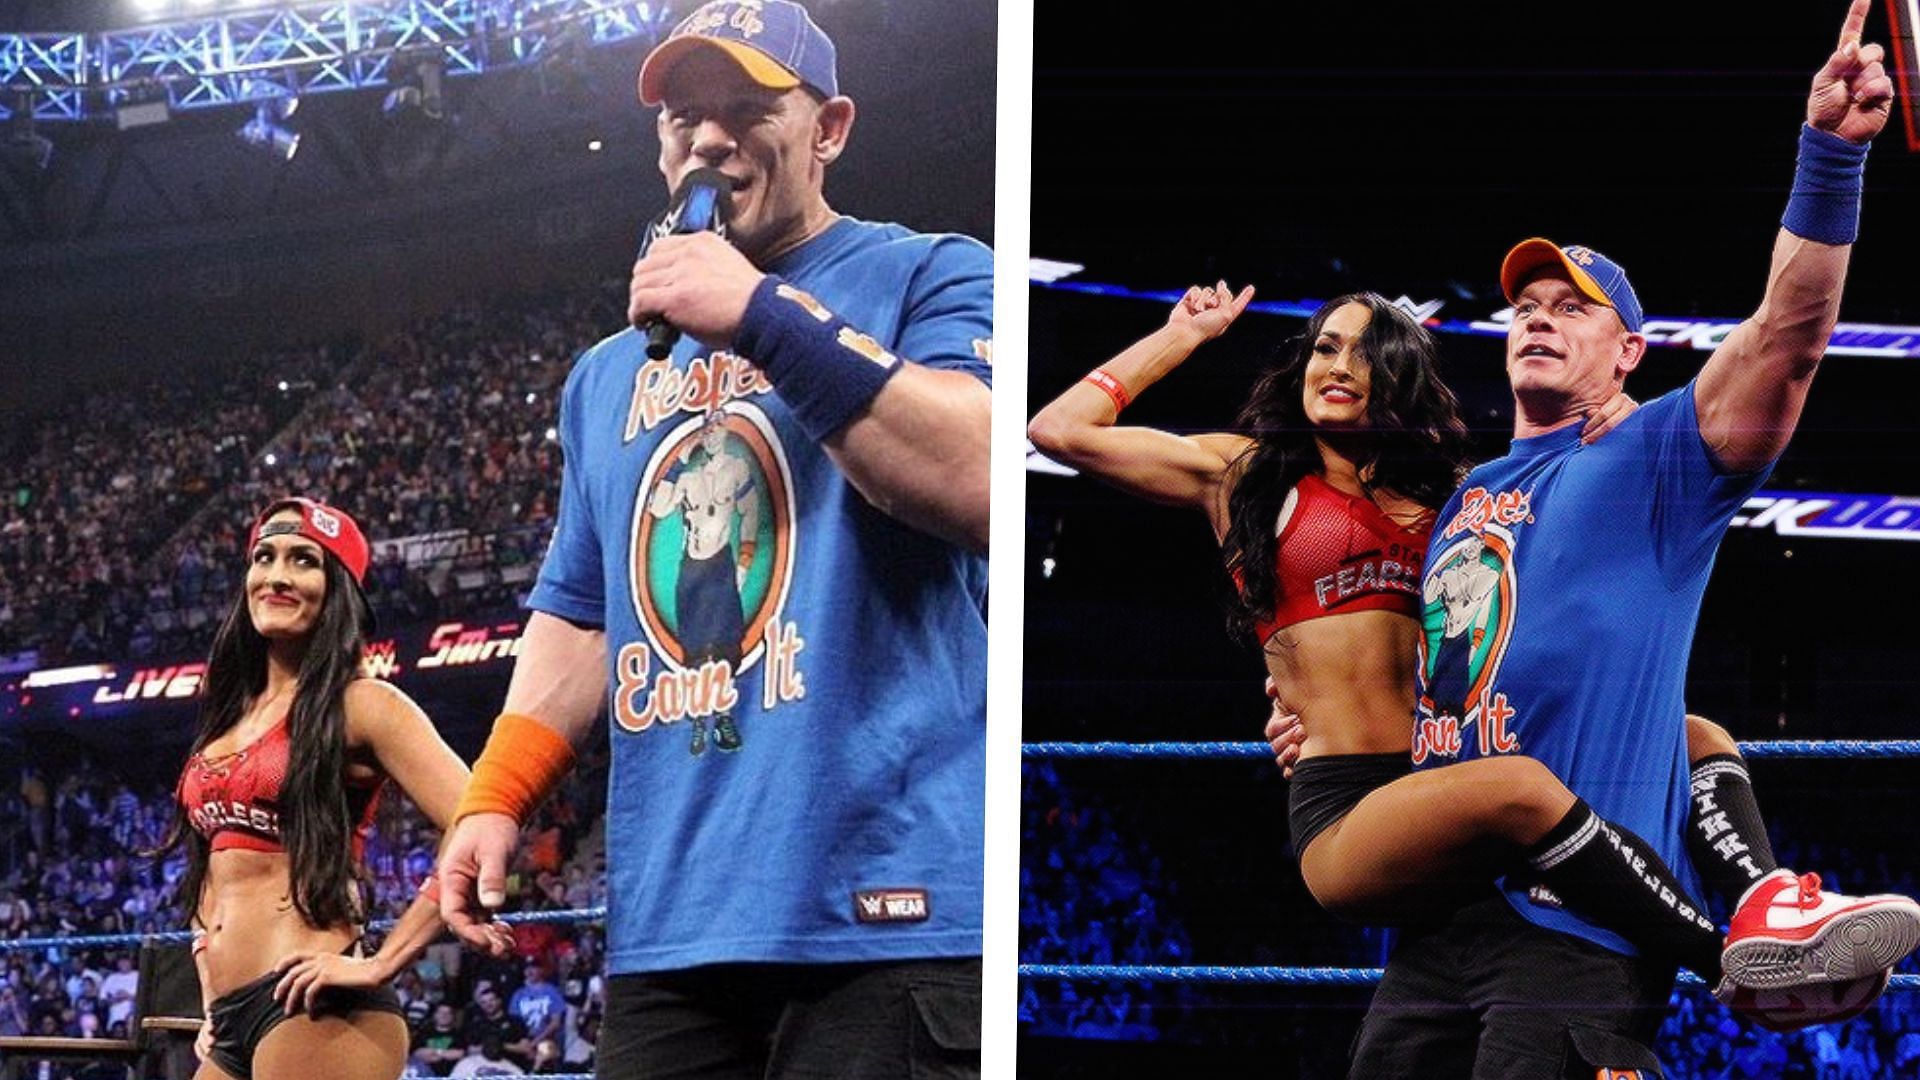 John Cena and Nikki Bella was a power couple in WWE